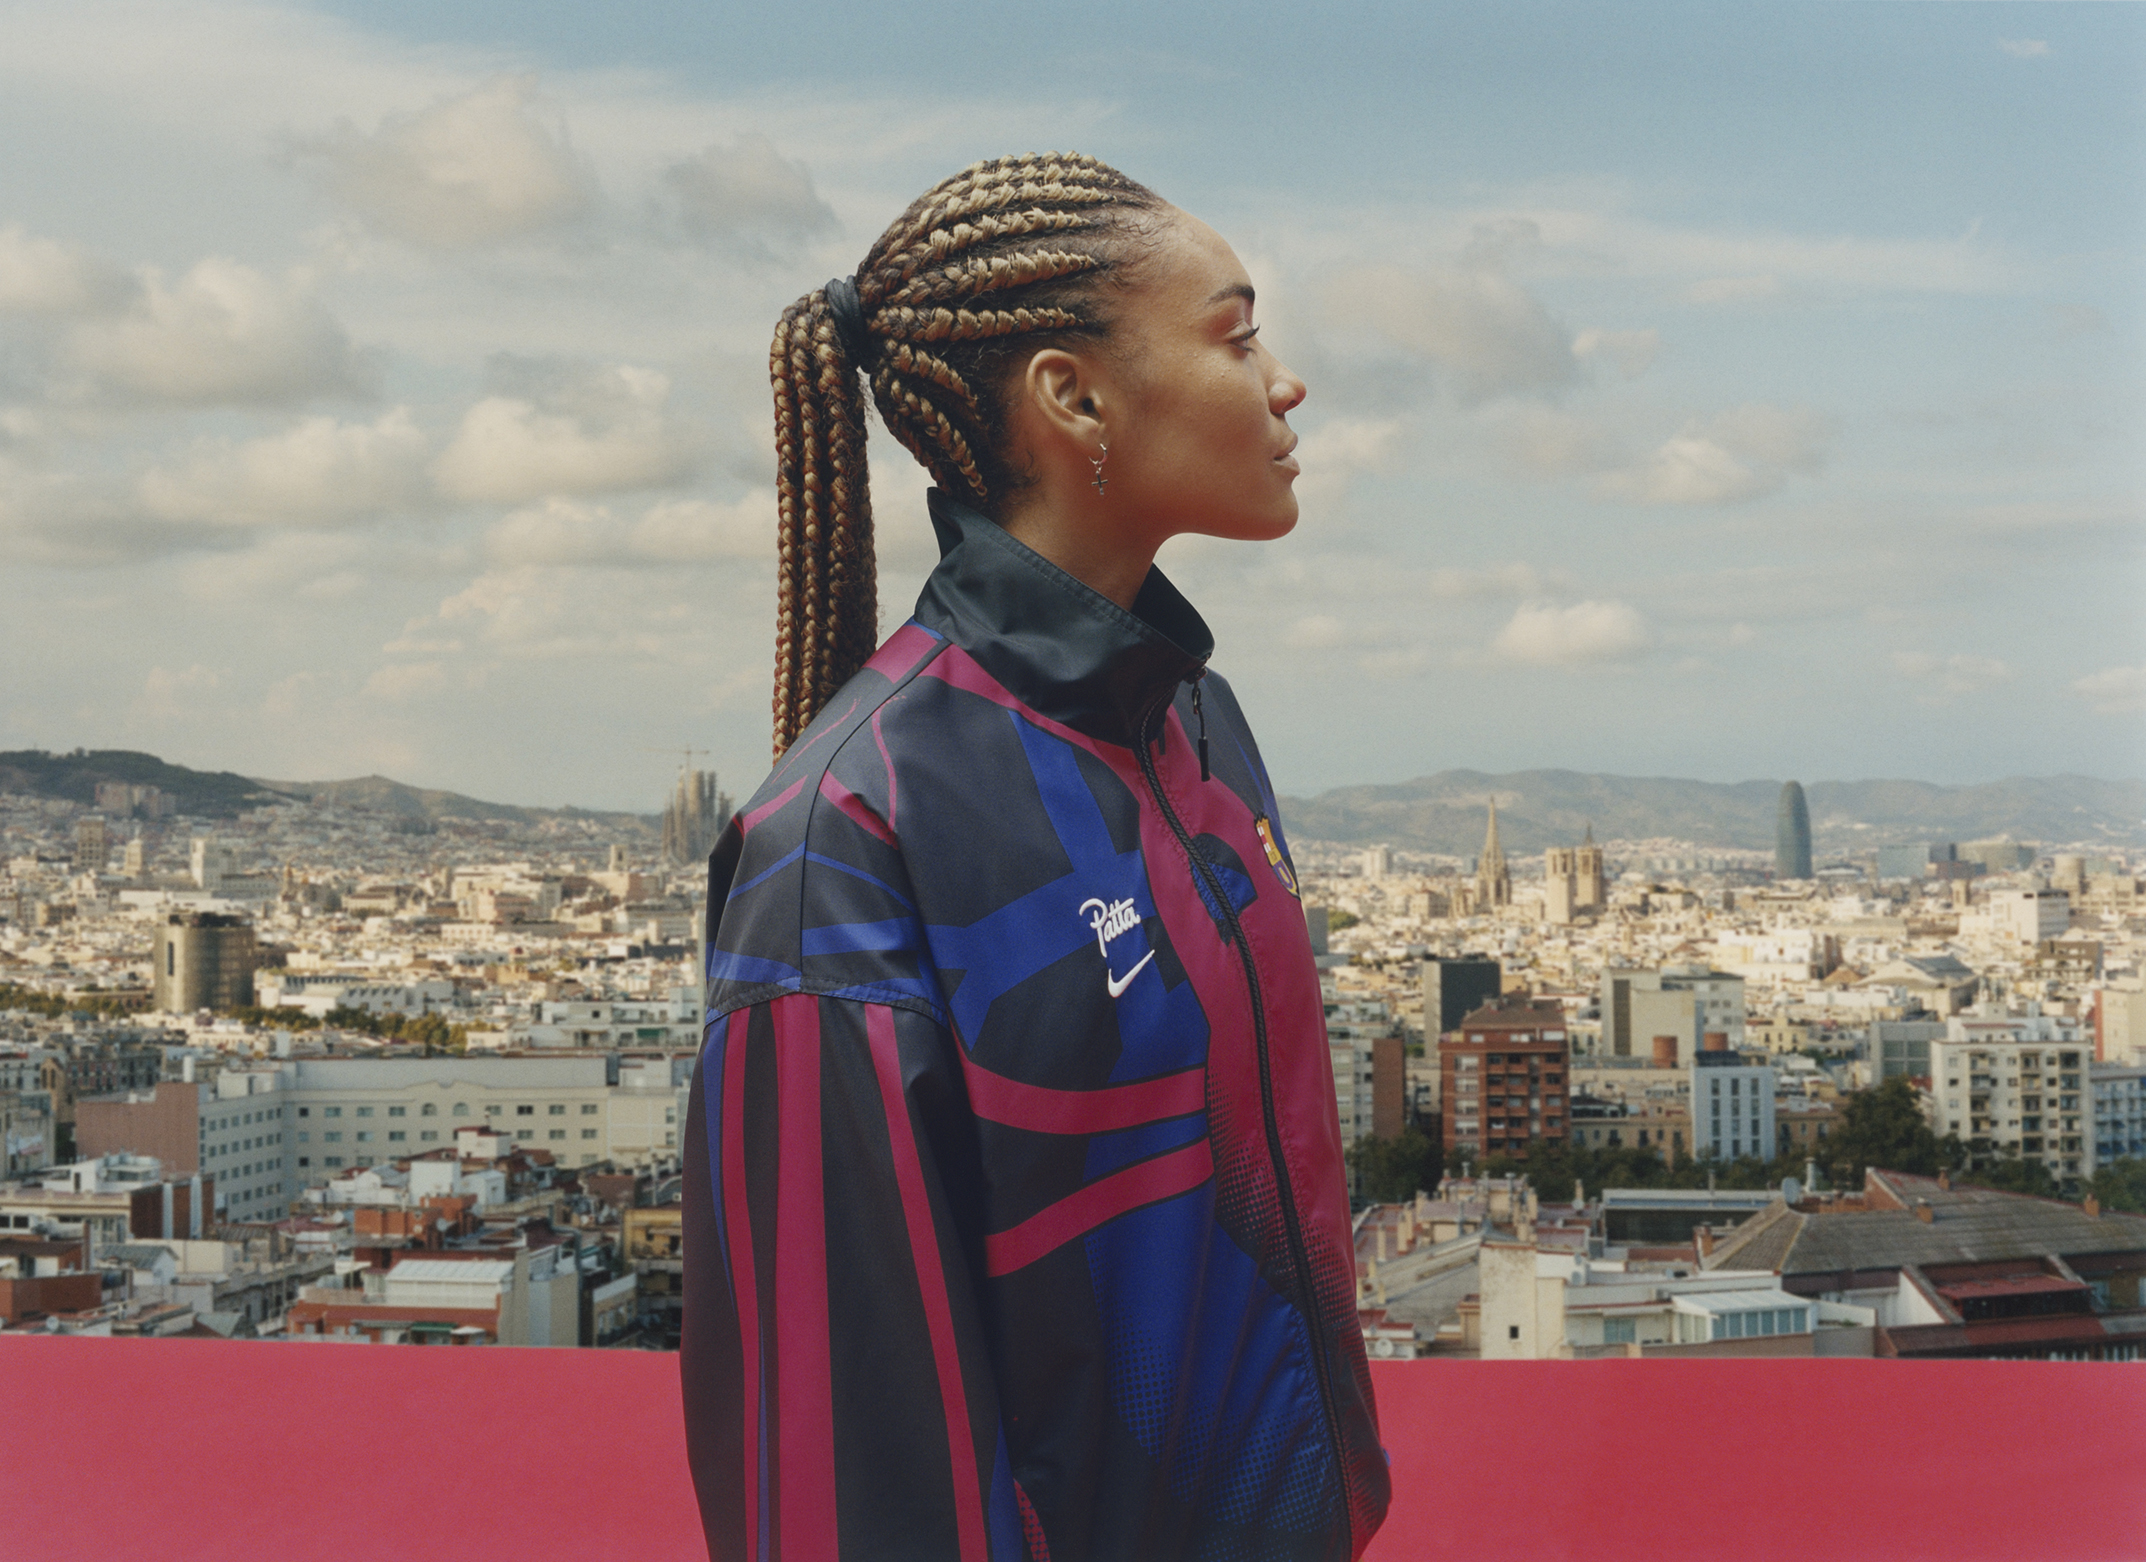 The Nike FC Barcelona x Patta collection unites a new generation